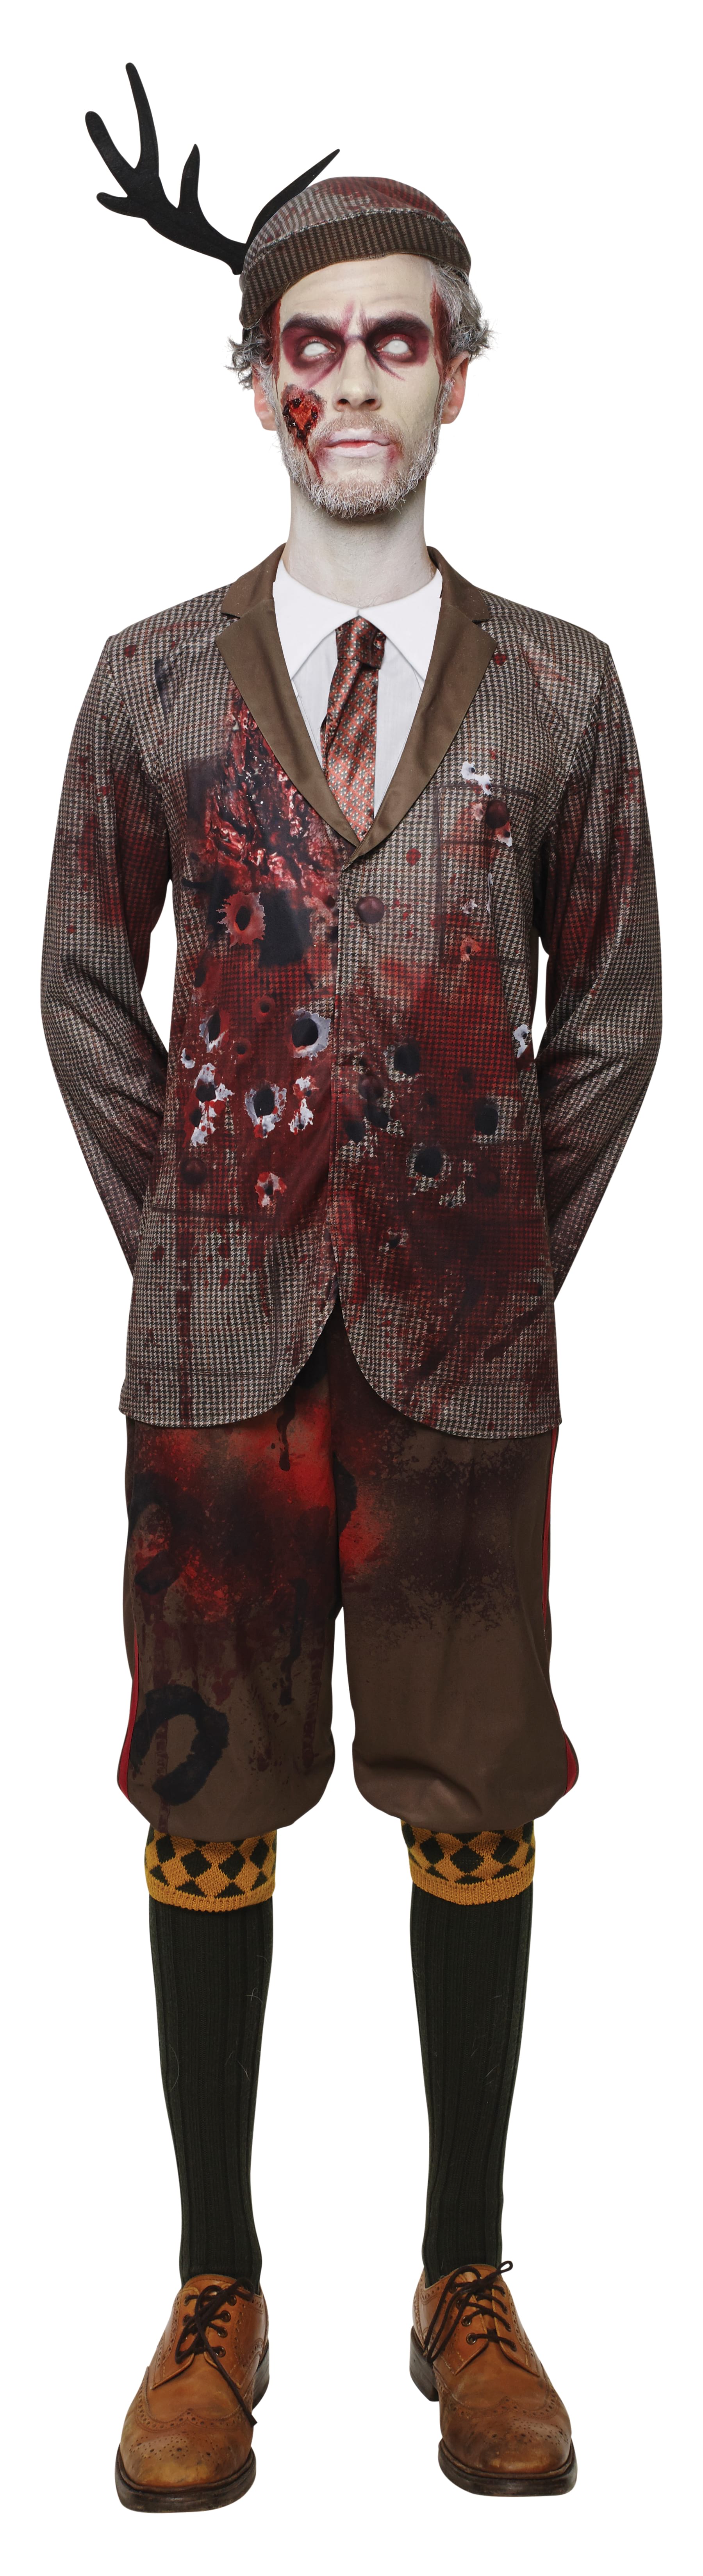 Lord Gravestone Deluxe Costume Adult